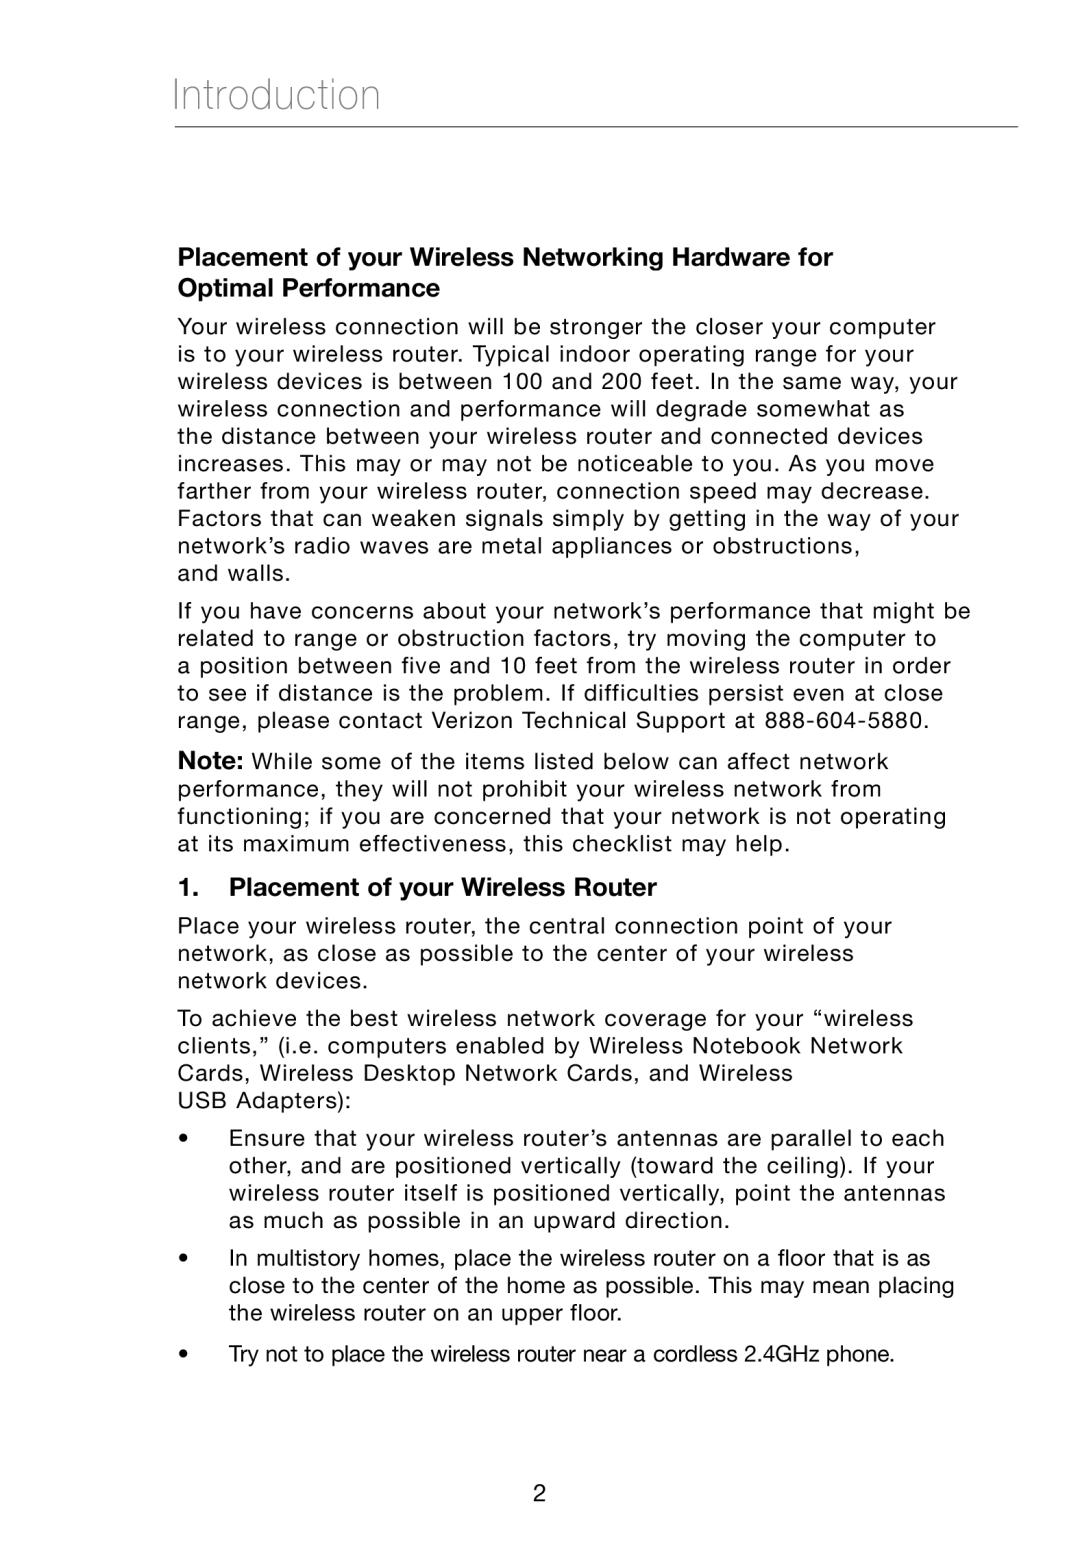 Verizon VZ4000 manual Introduction, Placement of your Wireless Router 